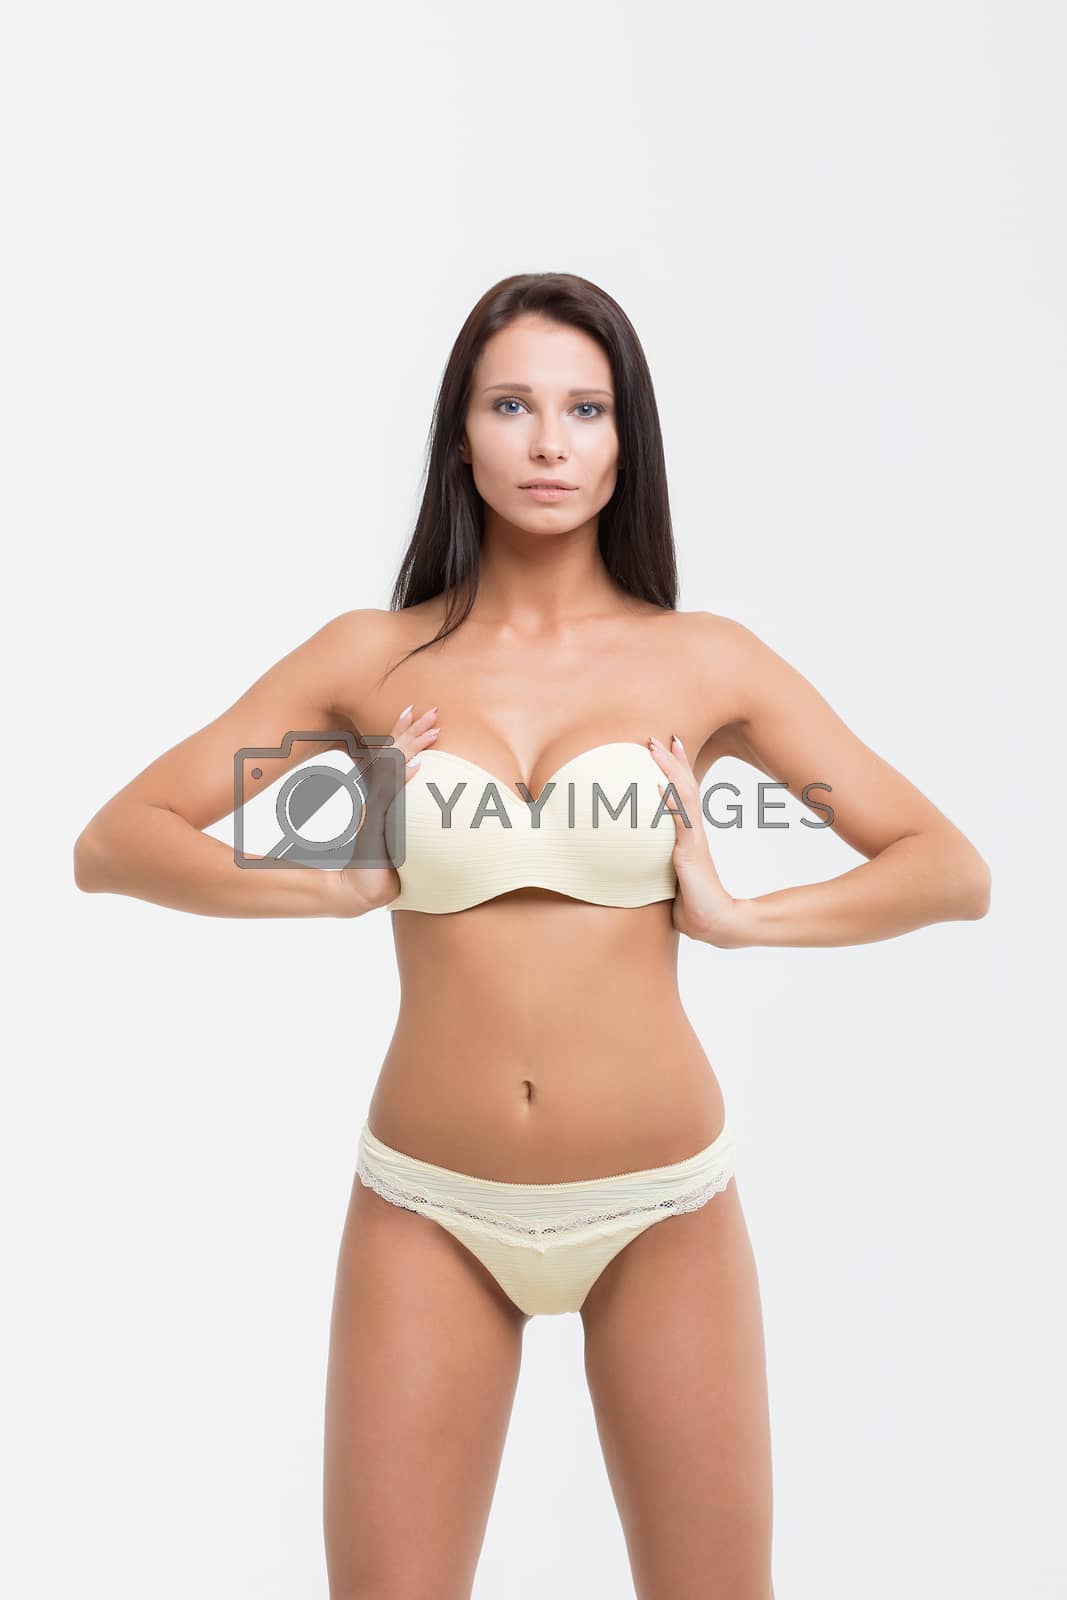 Royalty free image of Perfect womans body. by 3KStudio